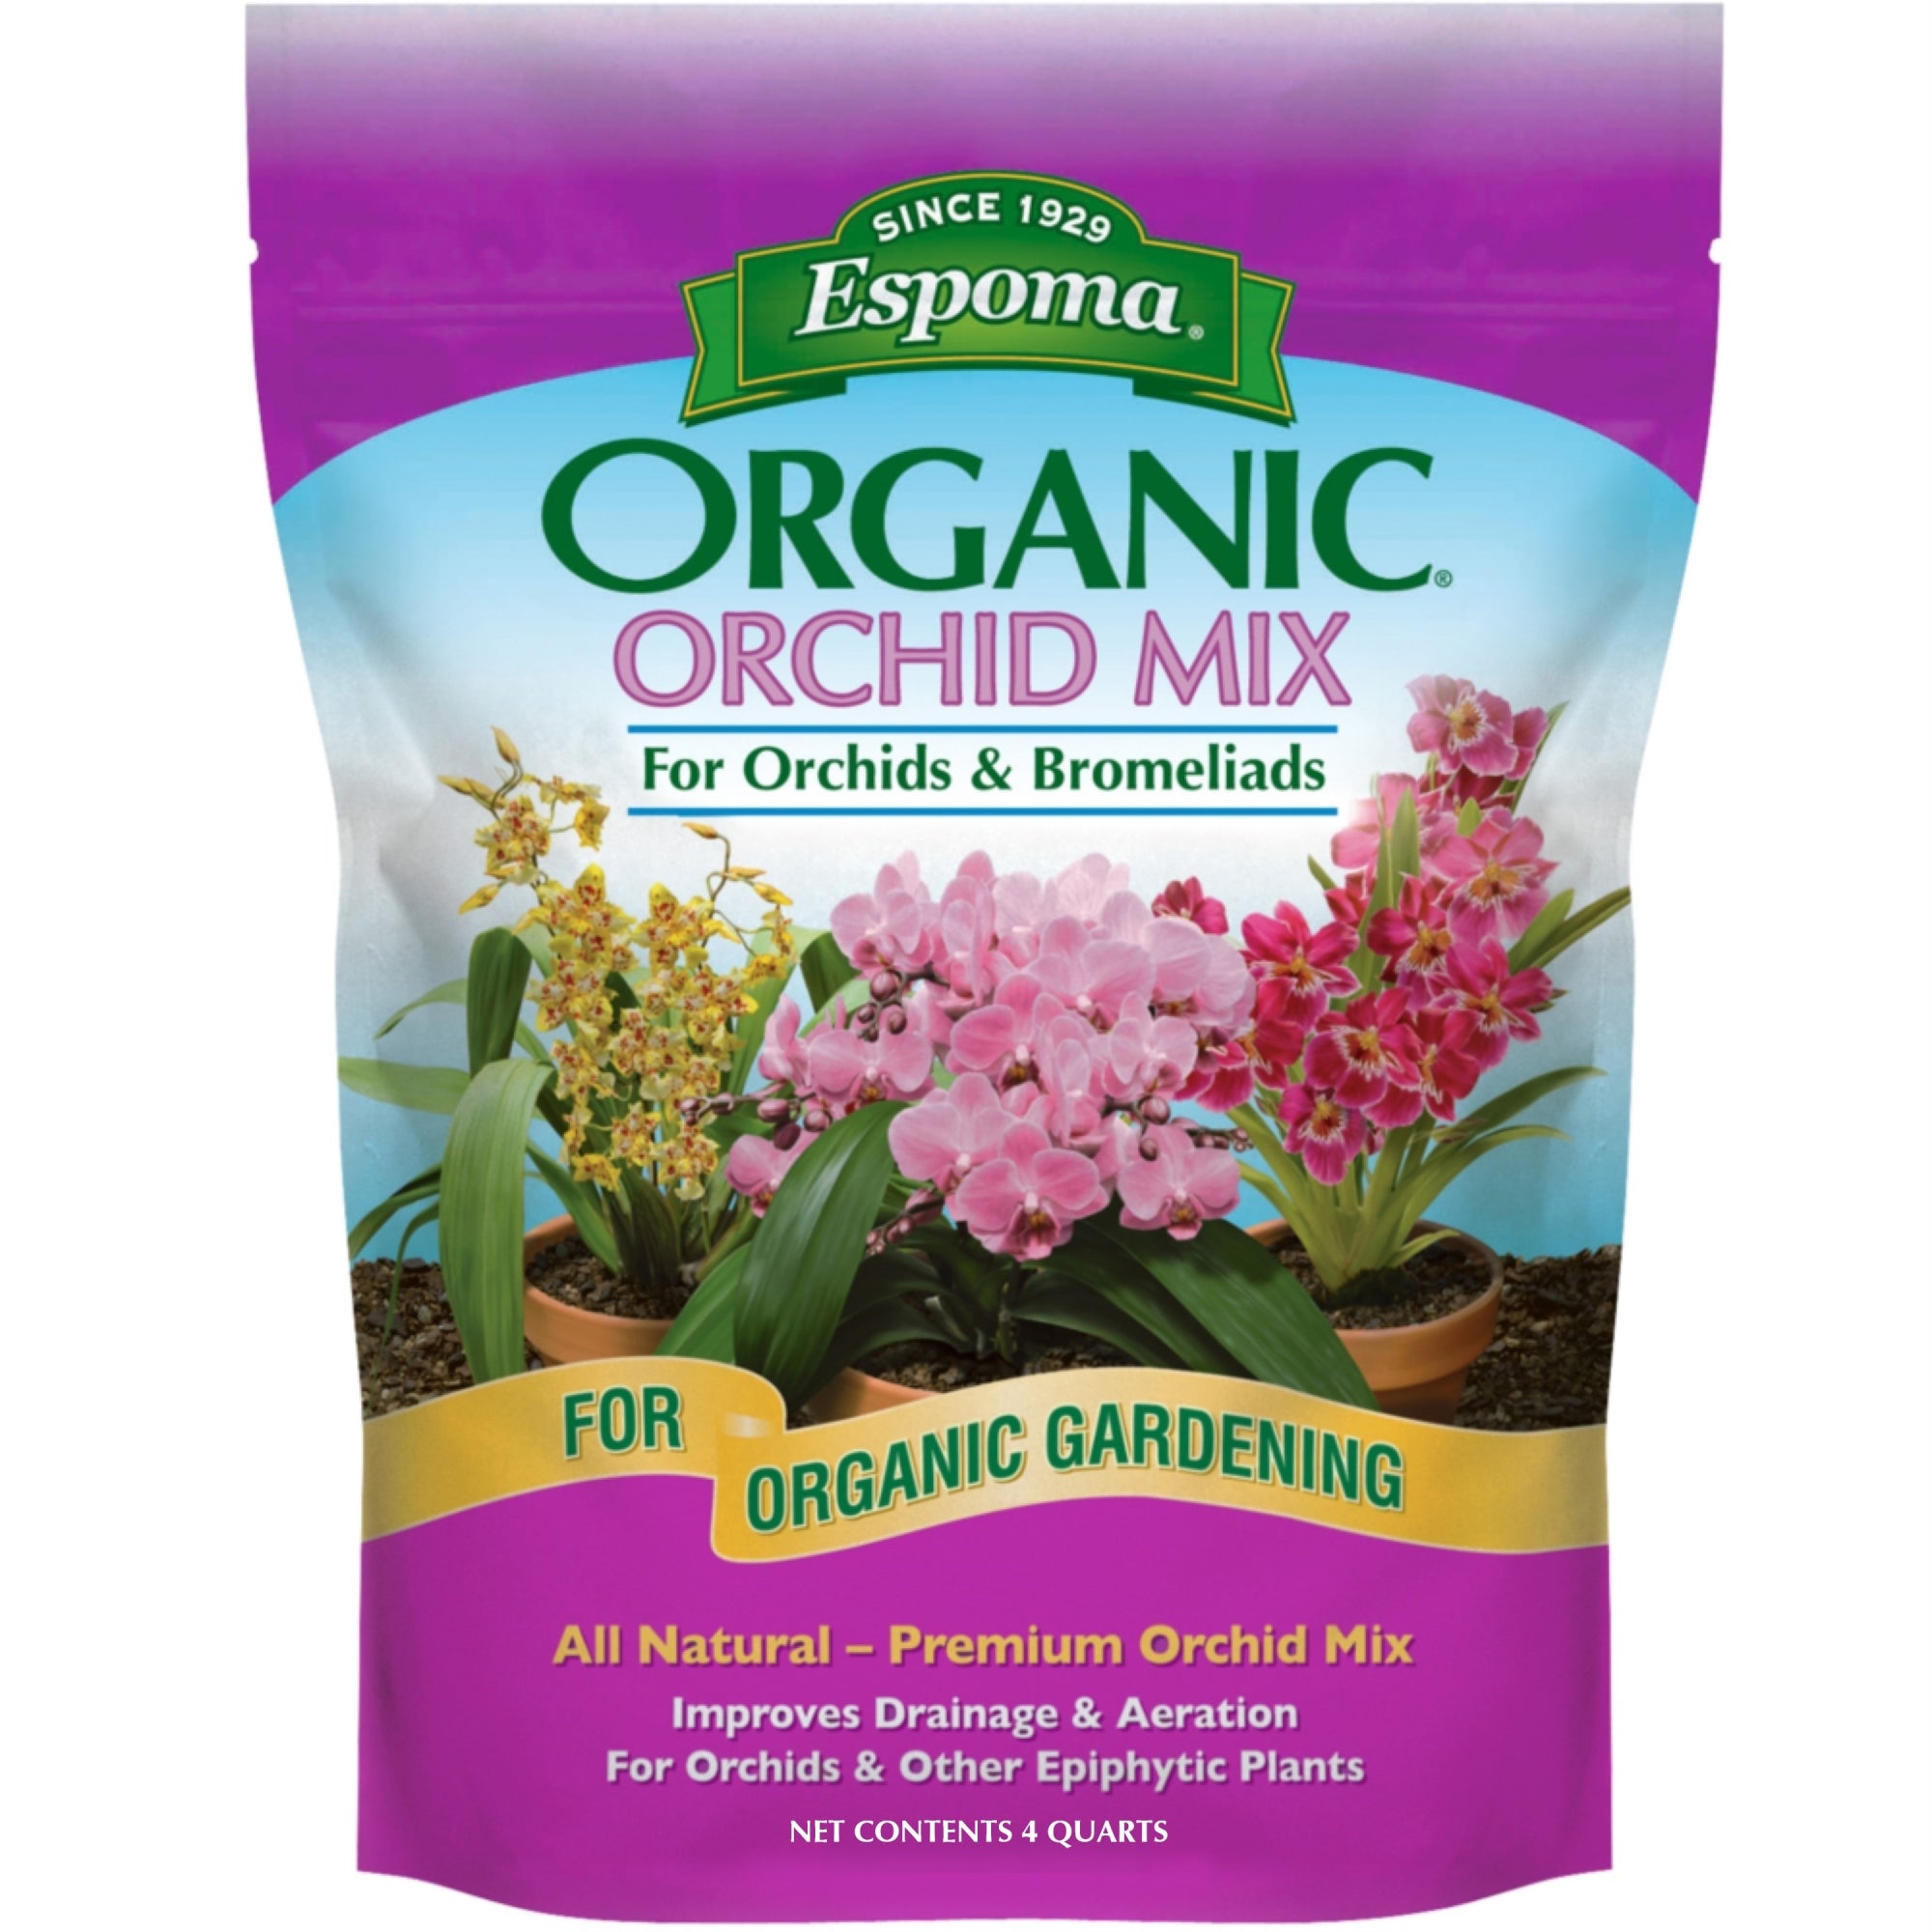 Espoma Organic Orchid Mix for Orchids and Epiphytic Plants, for Organic Gardening, 4 Qt Bag